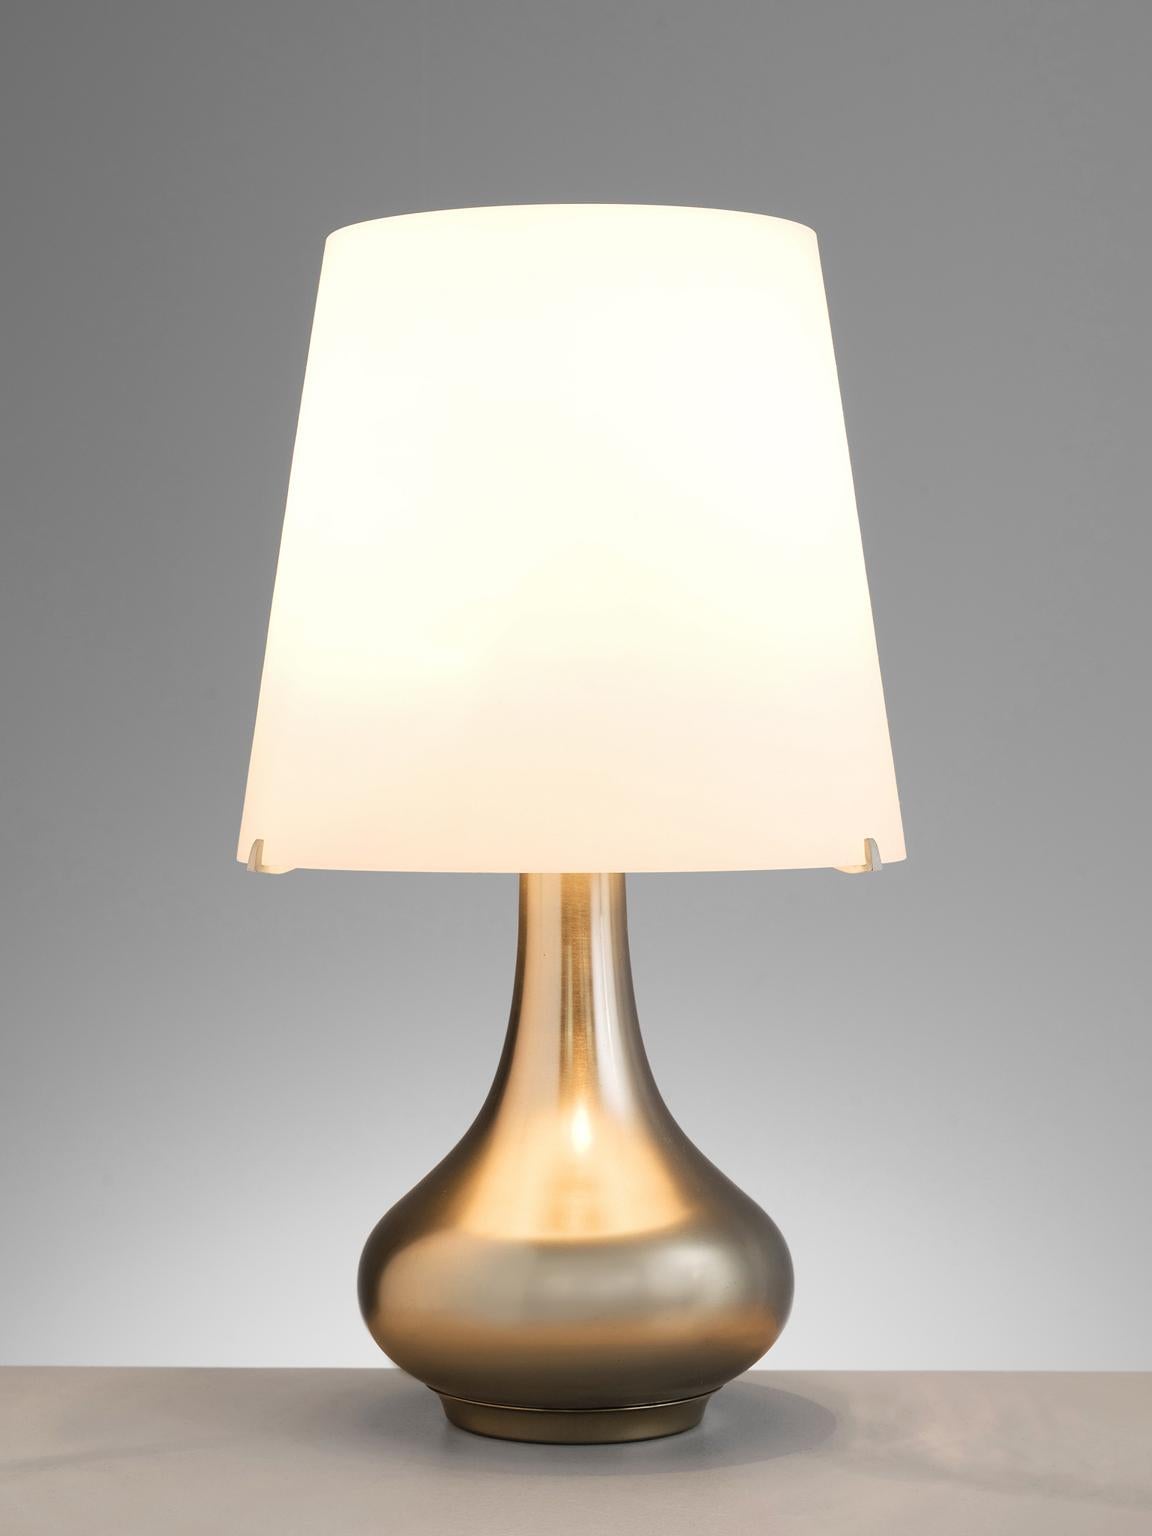 Max Ingrand for Fontana Arte table lamp, Model 2344, frosted glass, brushed nickel base, Italy, design 1964, production later

This set of classic lamps are made out of frosted glass shades that are mounted on a brushed nickel base. The base is